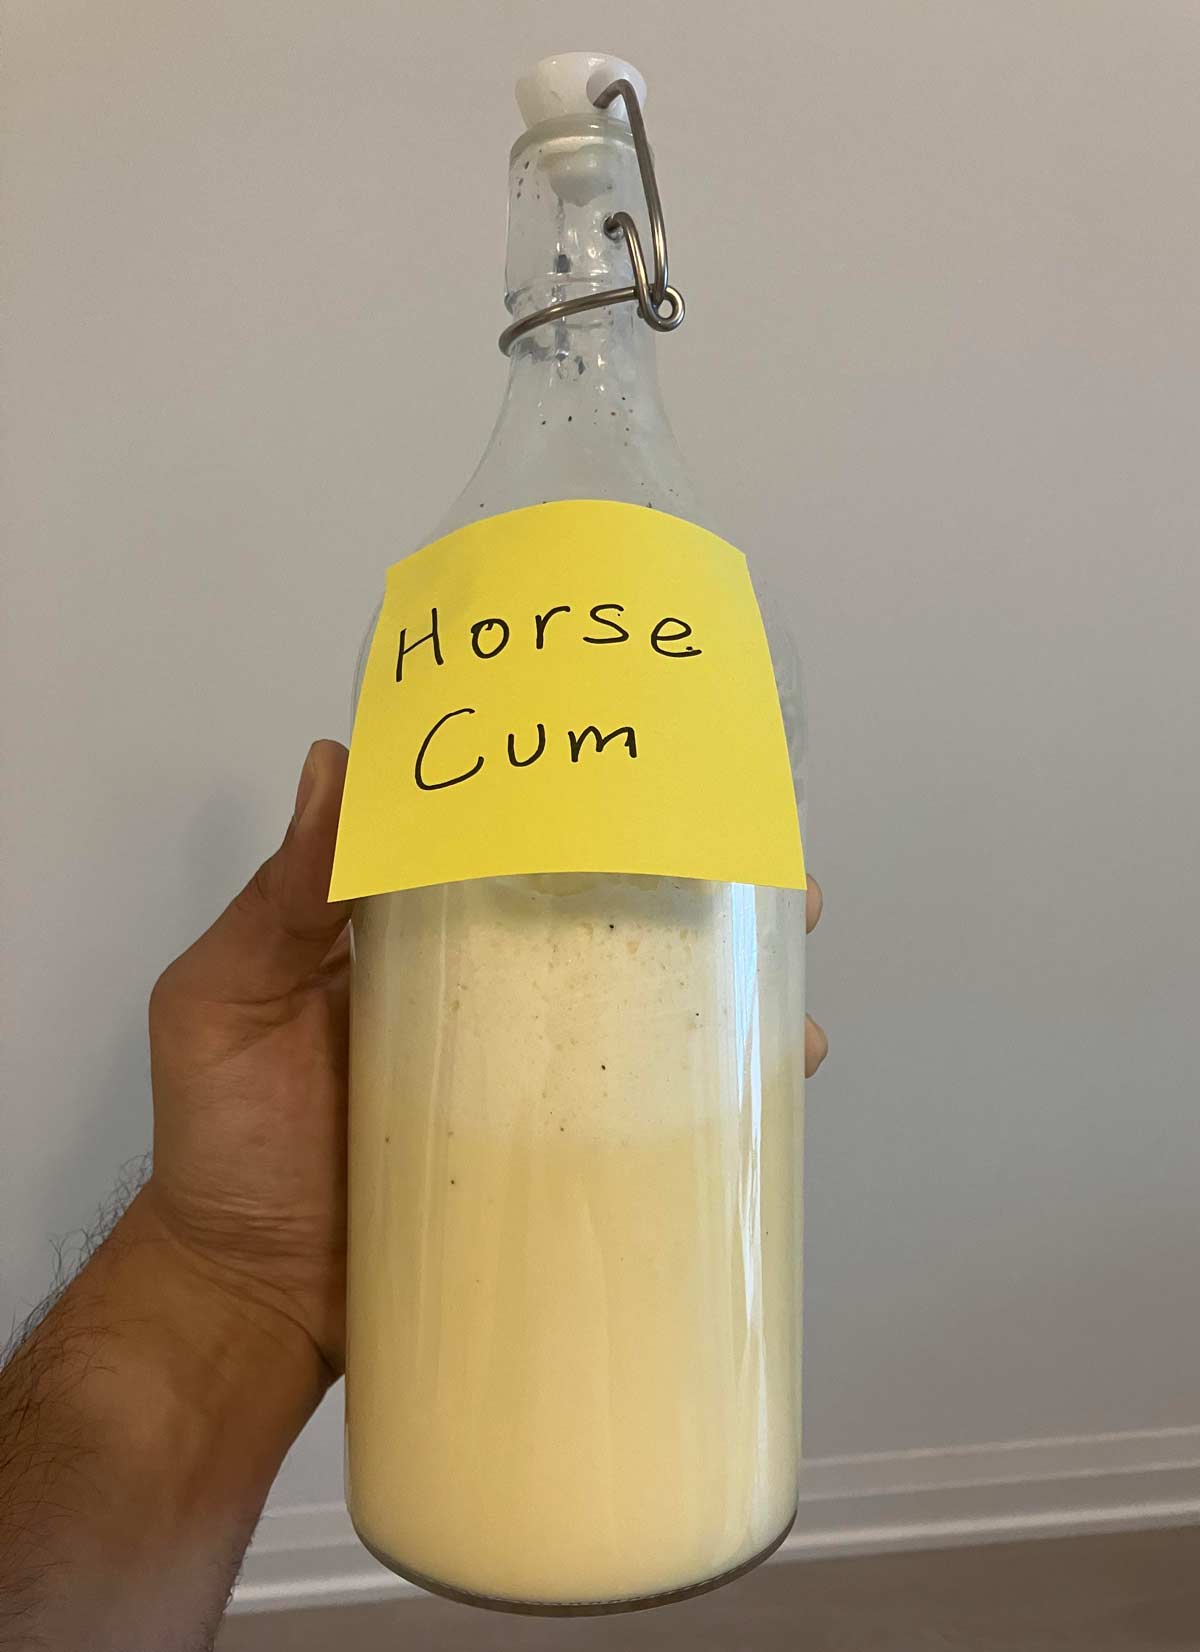 My friend is a veterinarian student and this is how he chooses to label his eggnog